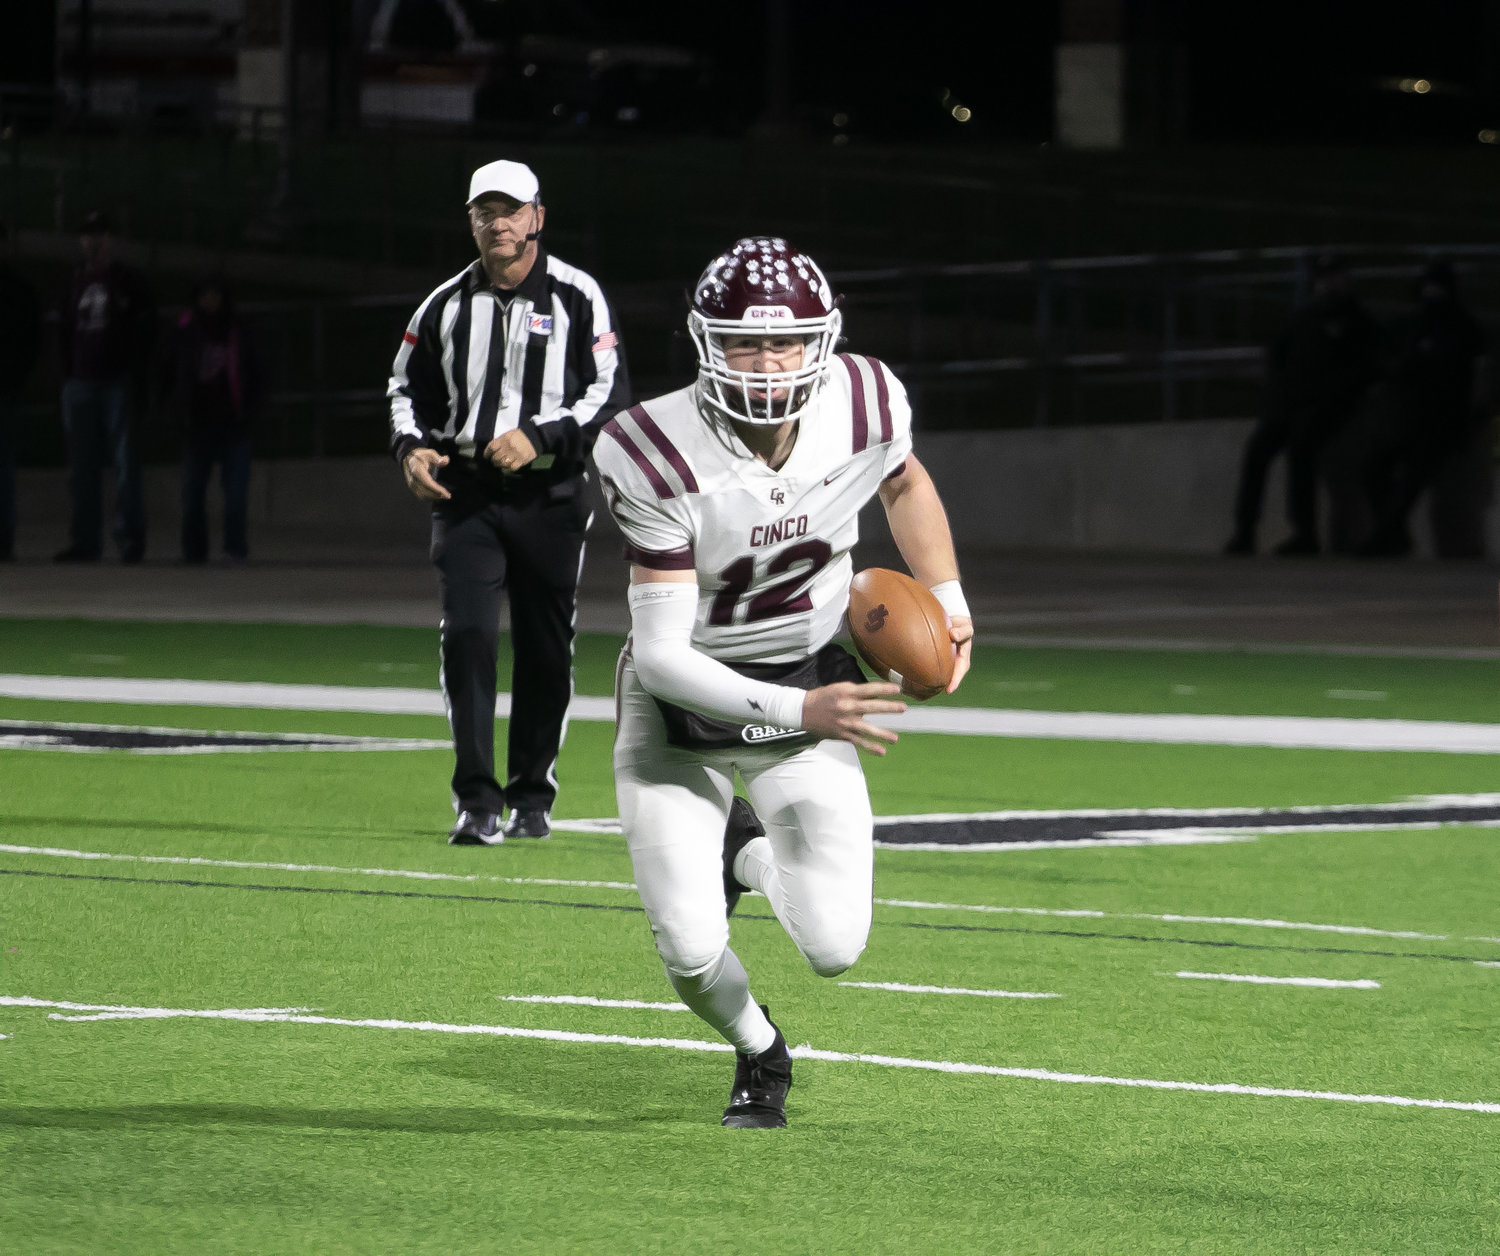 Gavin Rutherford runs during Friday's Class 6A-Division I area round game between Cinco Ranch and Cy-Fair at Pridgeon Stadium.